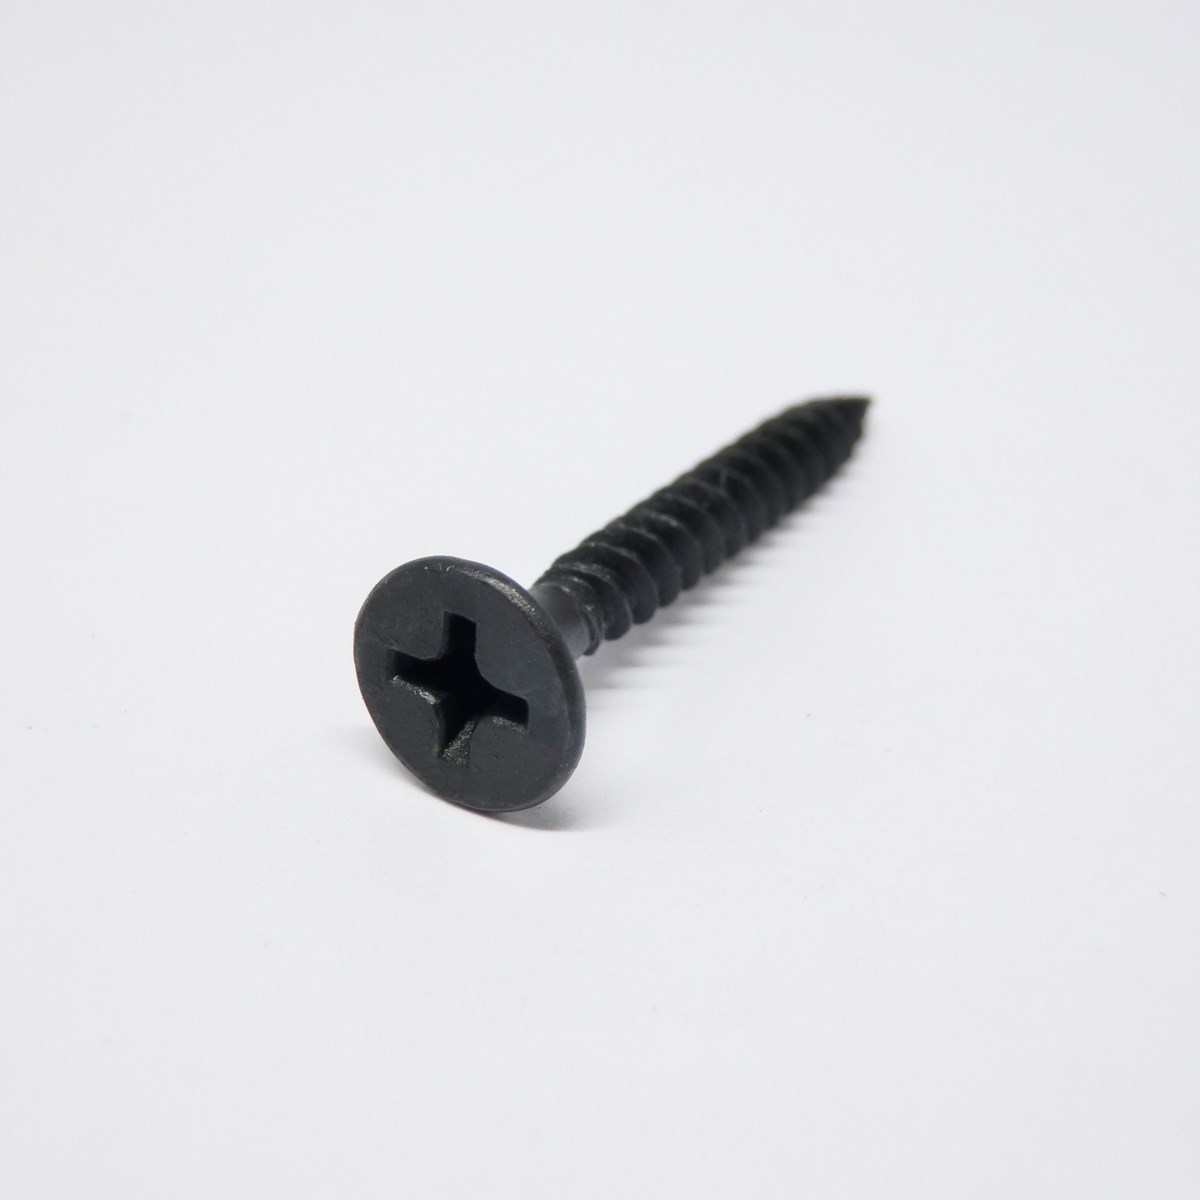 ACE 100104ACE Screw, #6 Thread, 1-1/8 in L, Fine Thread, Bugle Head, Phillips Drive, Sharp Point, Steel, Black Phosphate - 1